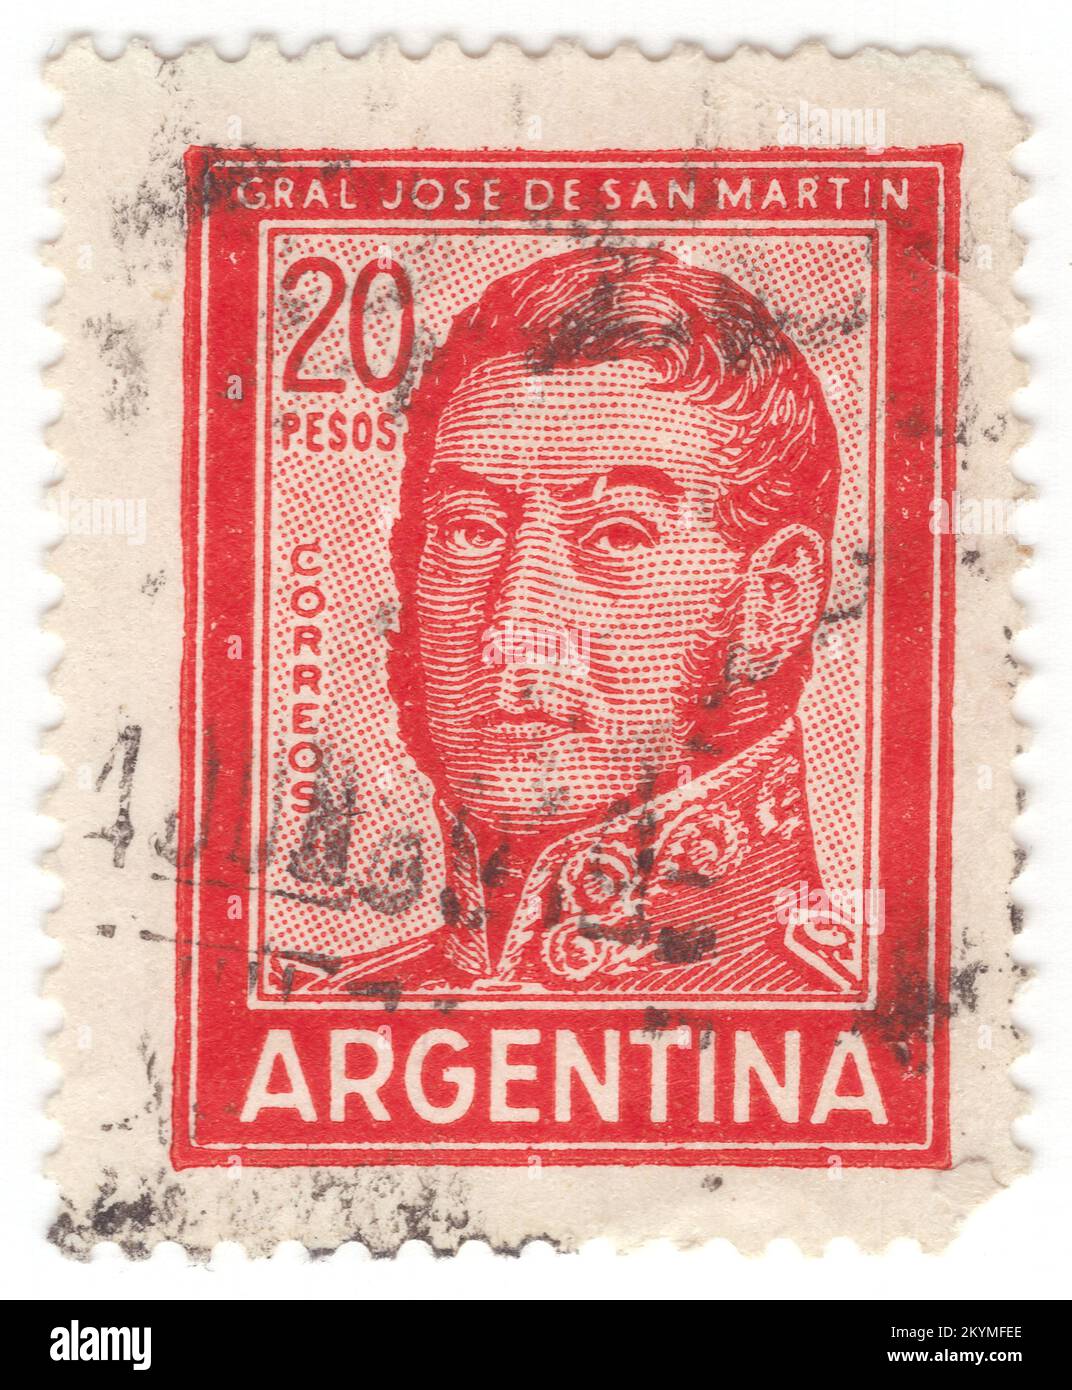 ARGENTINA - 1967: 20 pesos red postage stamp depicting portrait of José de San Martín (Jose Francisco de San Martín y Matorras), known as the Liberator of Argentina, Chile and Peru. Argentine general and the primary leader of the southern and central parts of South America's successful struggle for independence from the Spanish Empire who served as the Protector of Peru. Born in Yapeyú, Corrientes, in modern-day Argentina, he left the Viceroyalty of the Río de la Plata at the early age of seven to study in Málaga, Spain Stock Photo